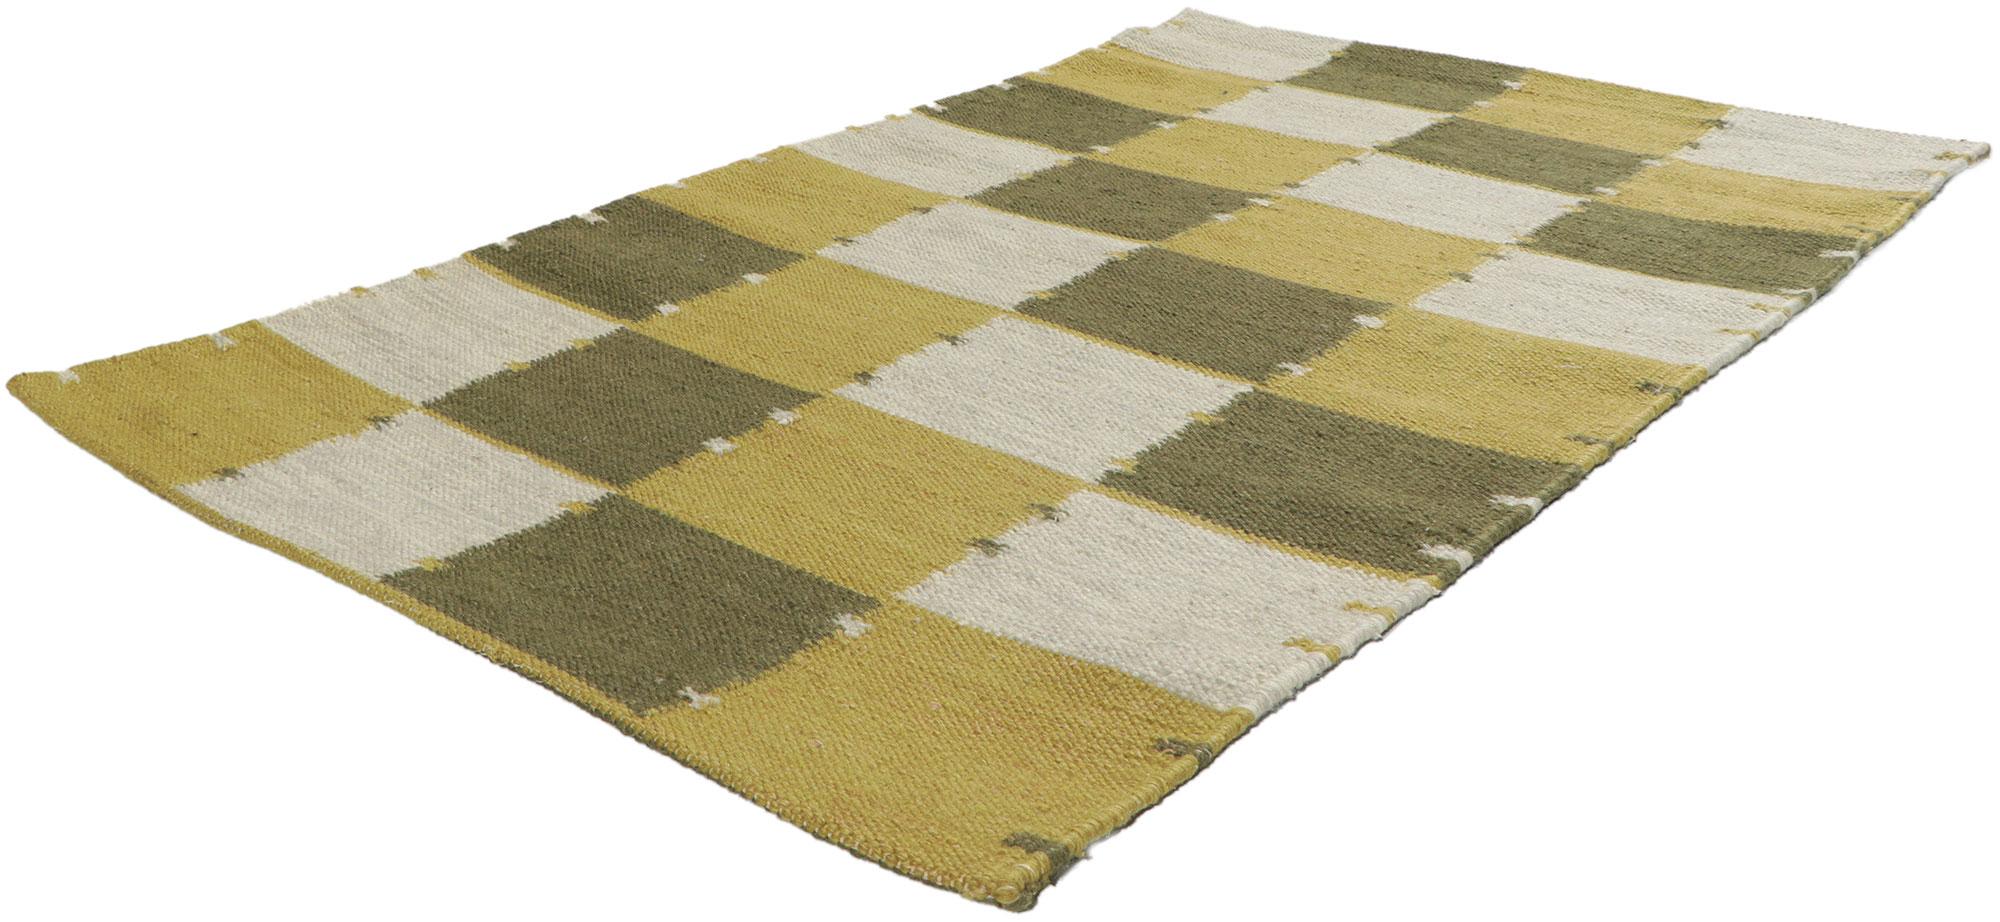 30813-30814 New pair of matching Swedish inspired kilim rugs with Scandinavian Modern Style. With its geometric design and earthy colorway, this hand-woven wool Swedish inspired Kilim rug beautifully embodies the simplicity of Scandinavian modern